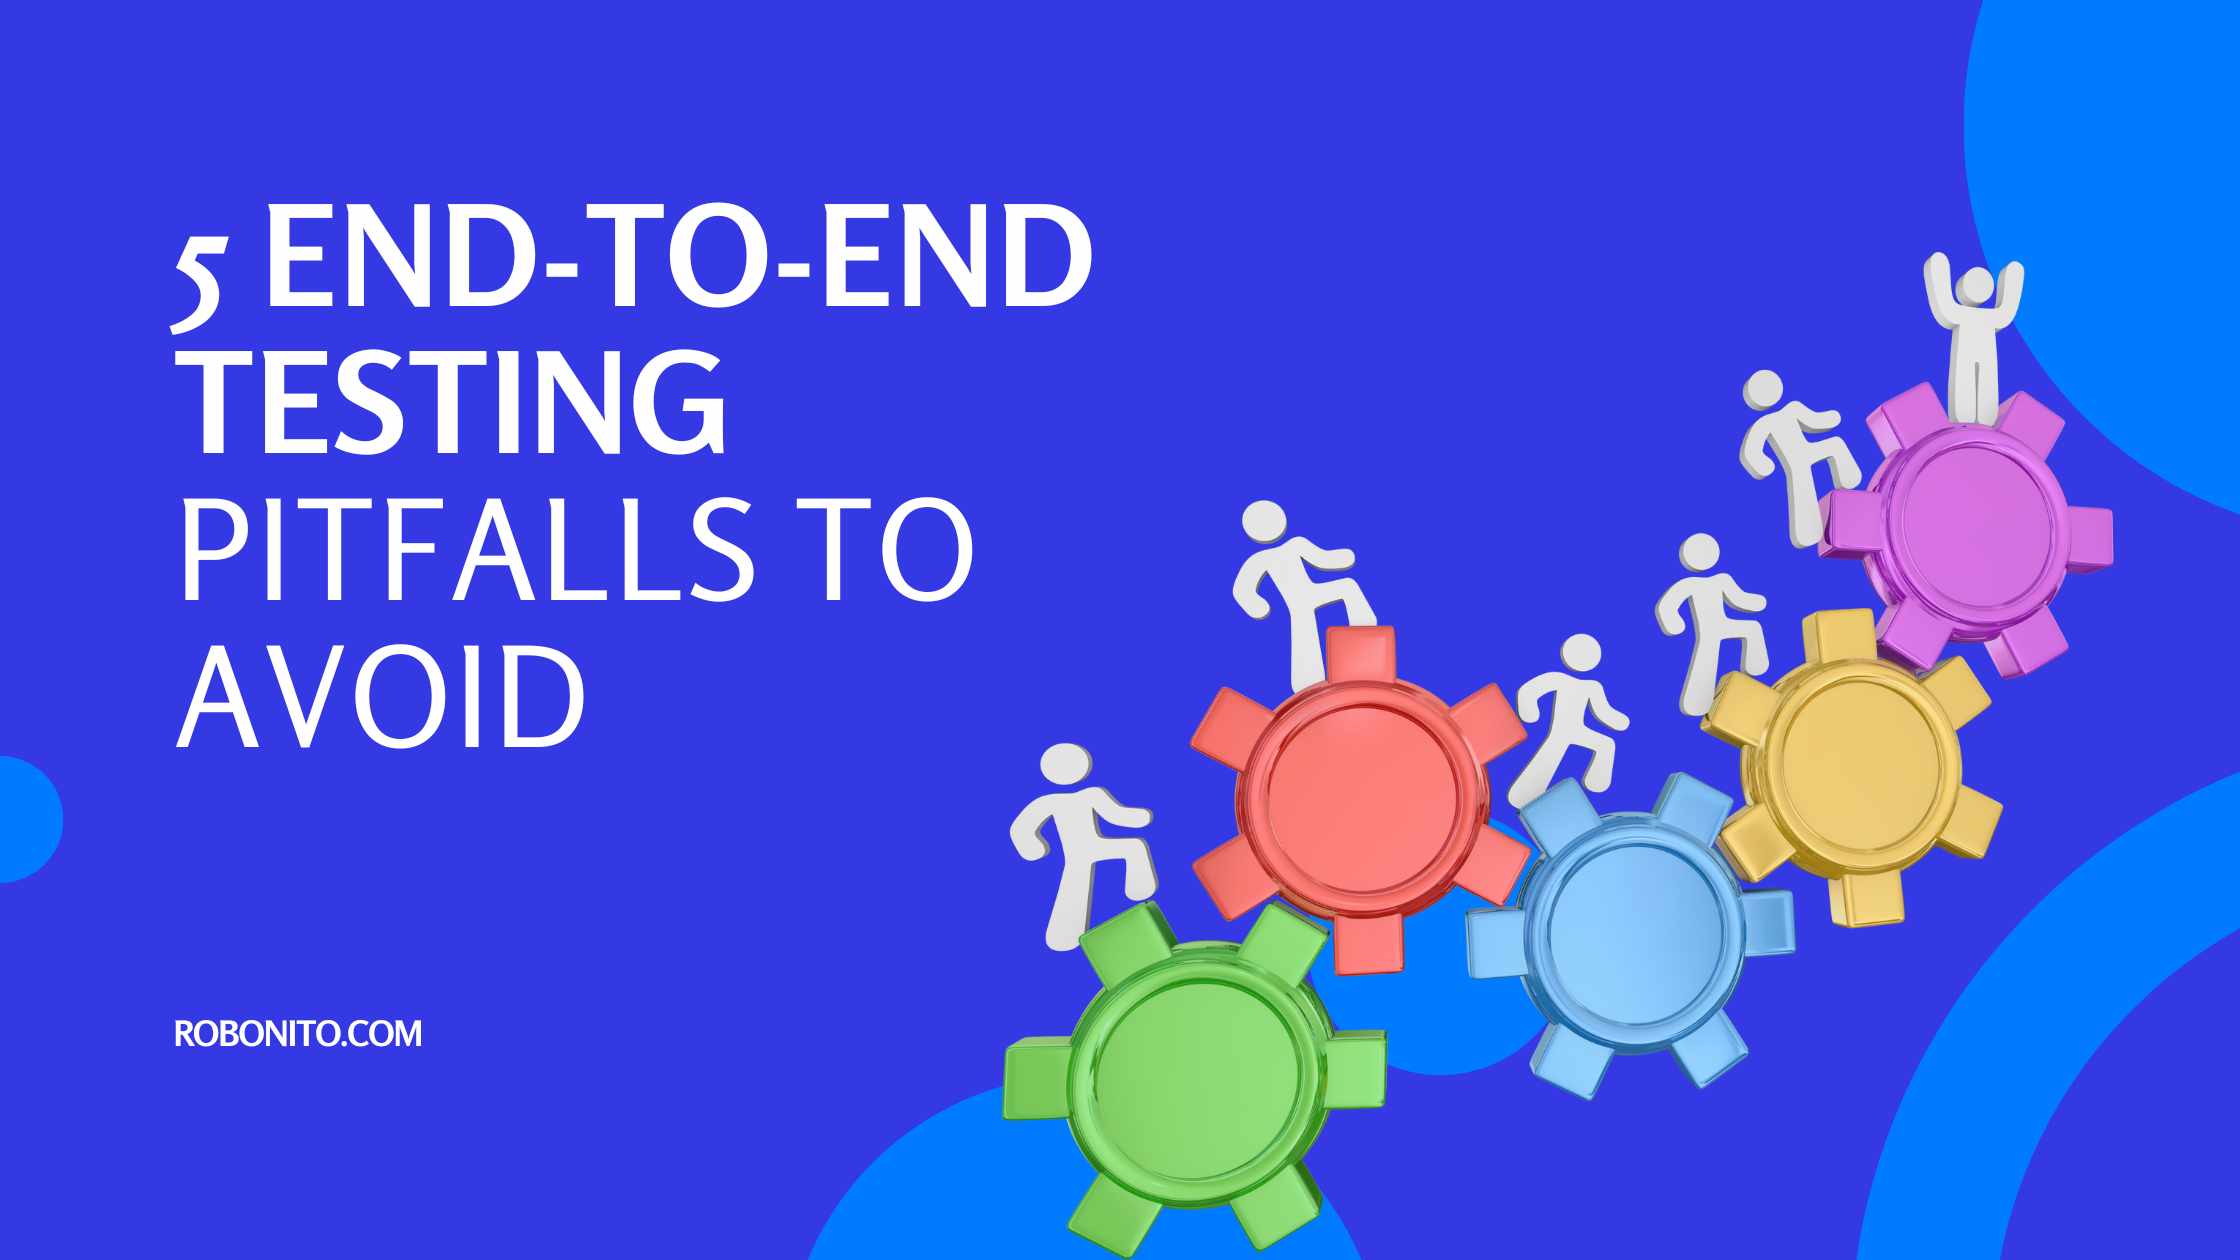 5 End-to-End Testing Pitfalls to Avoid